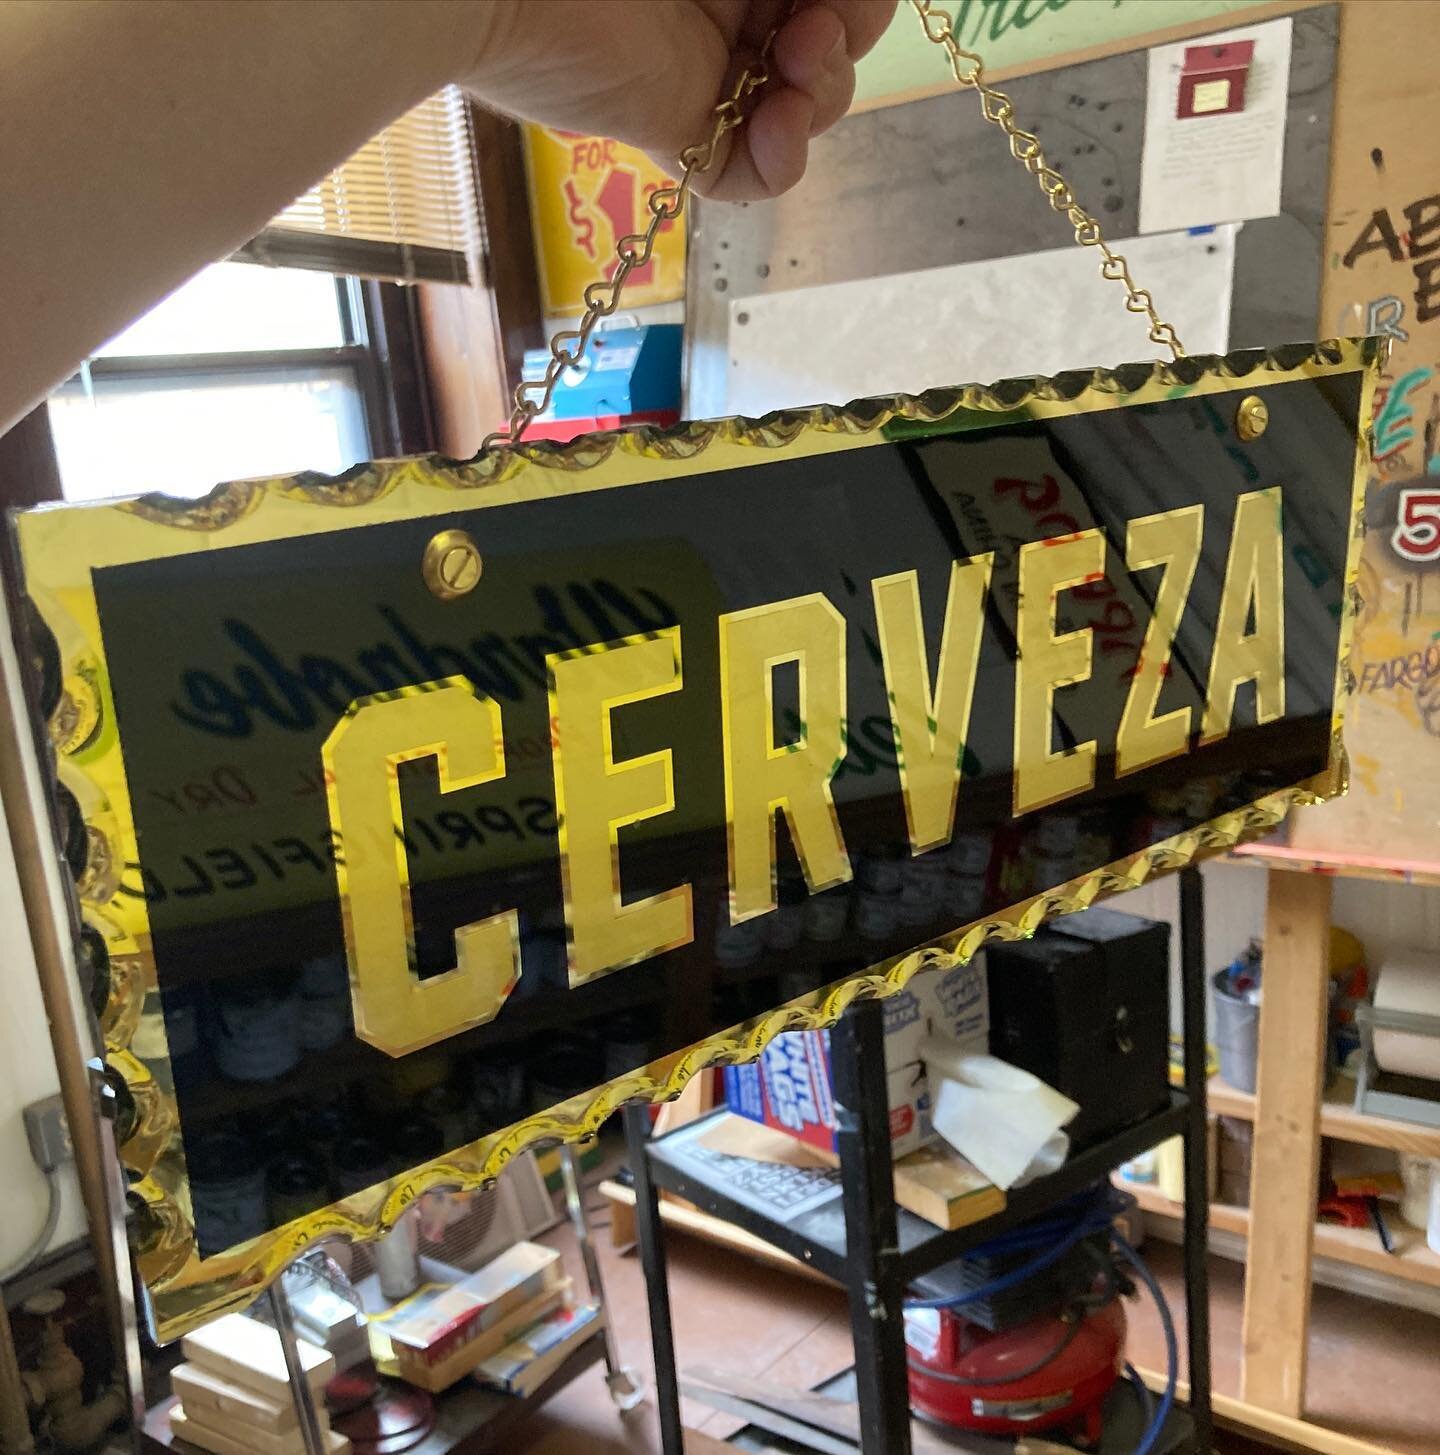 ✨ New sample piece! ✨
We started with 1/4&rdquo; plate glass and cut to size, scalloped the edges, reverse painted and 2-tone water gilded with 23k gold leaf. Cheers! 🍻